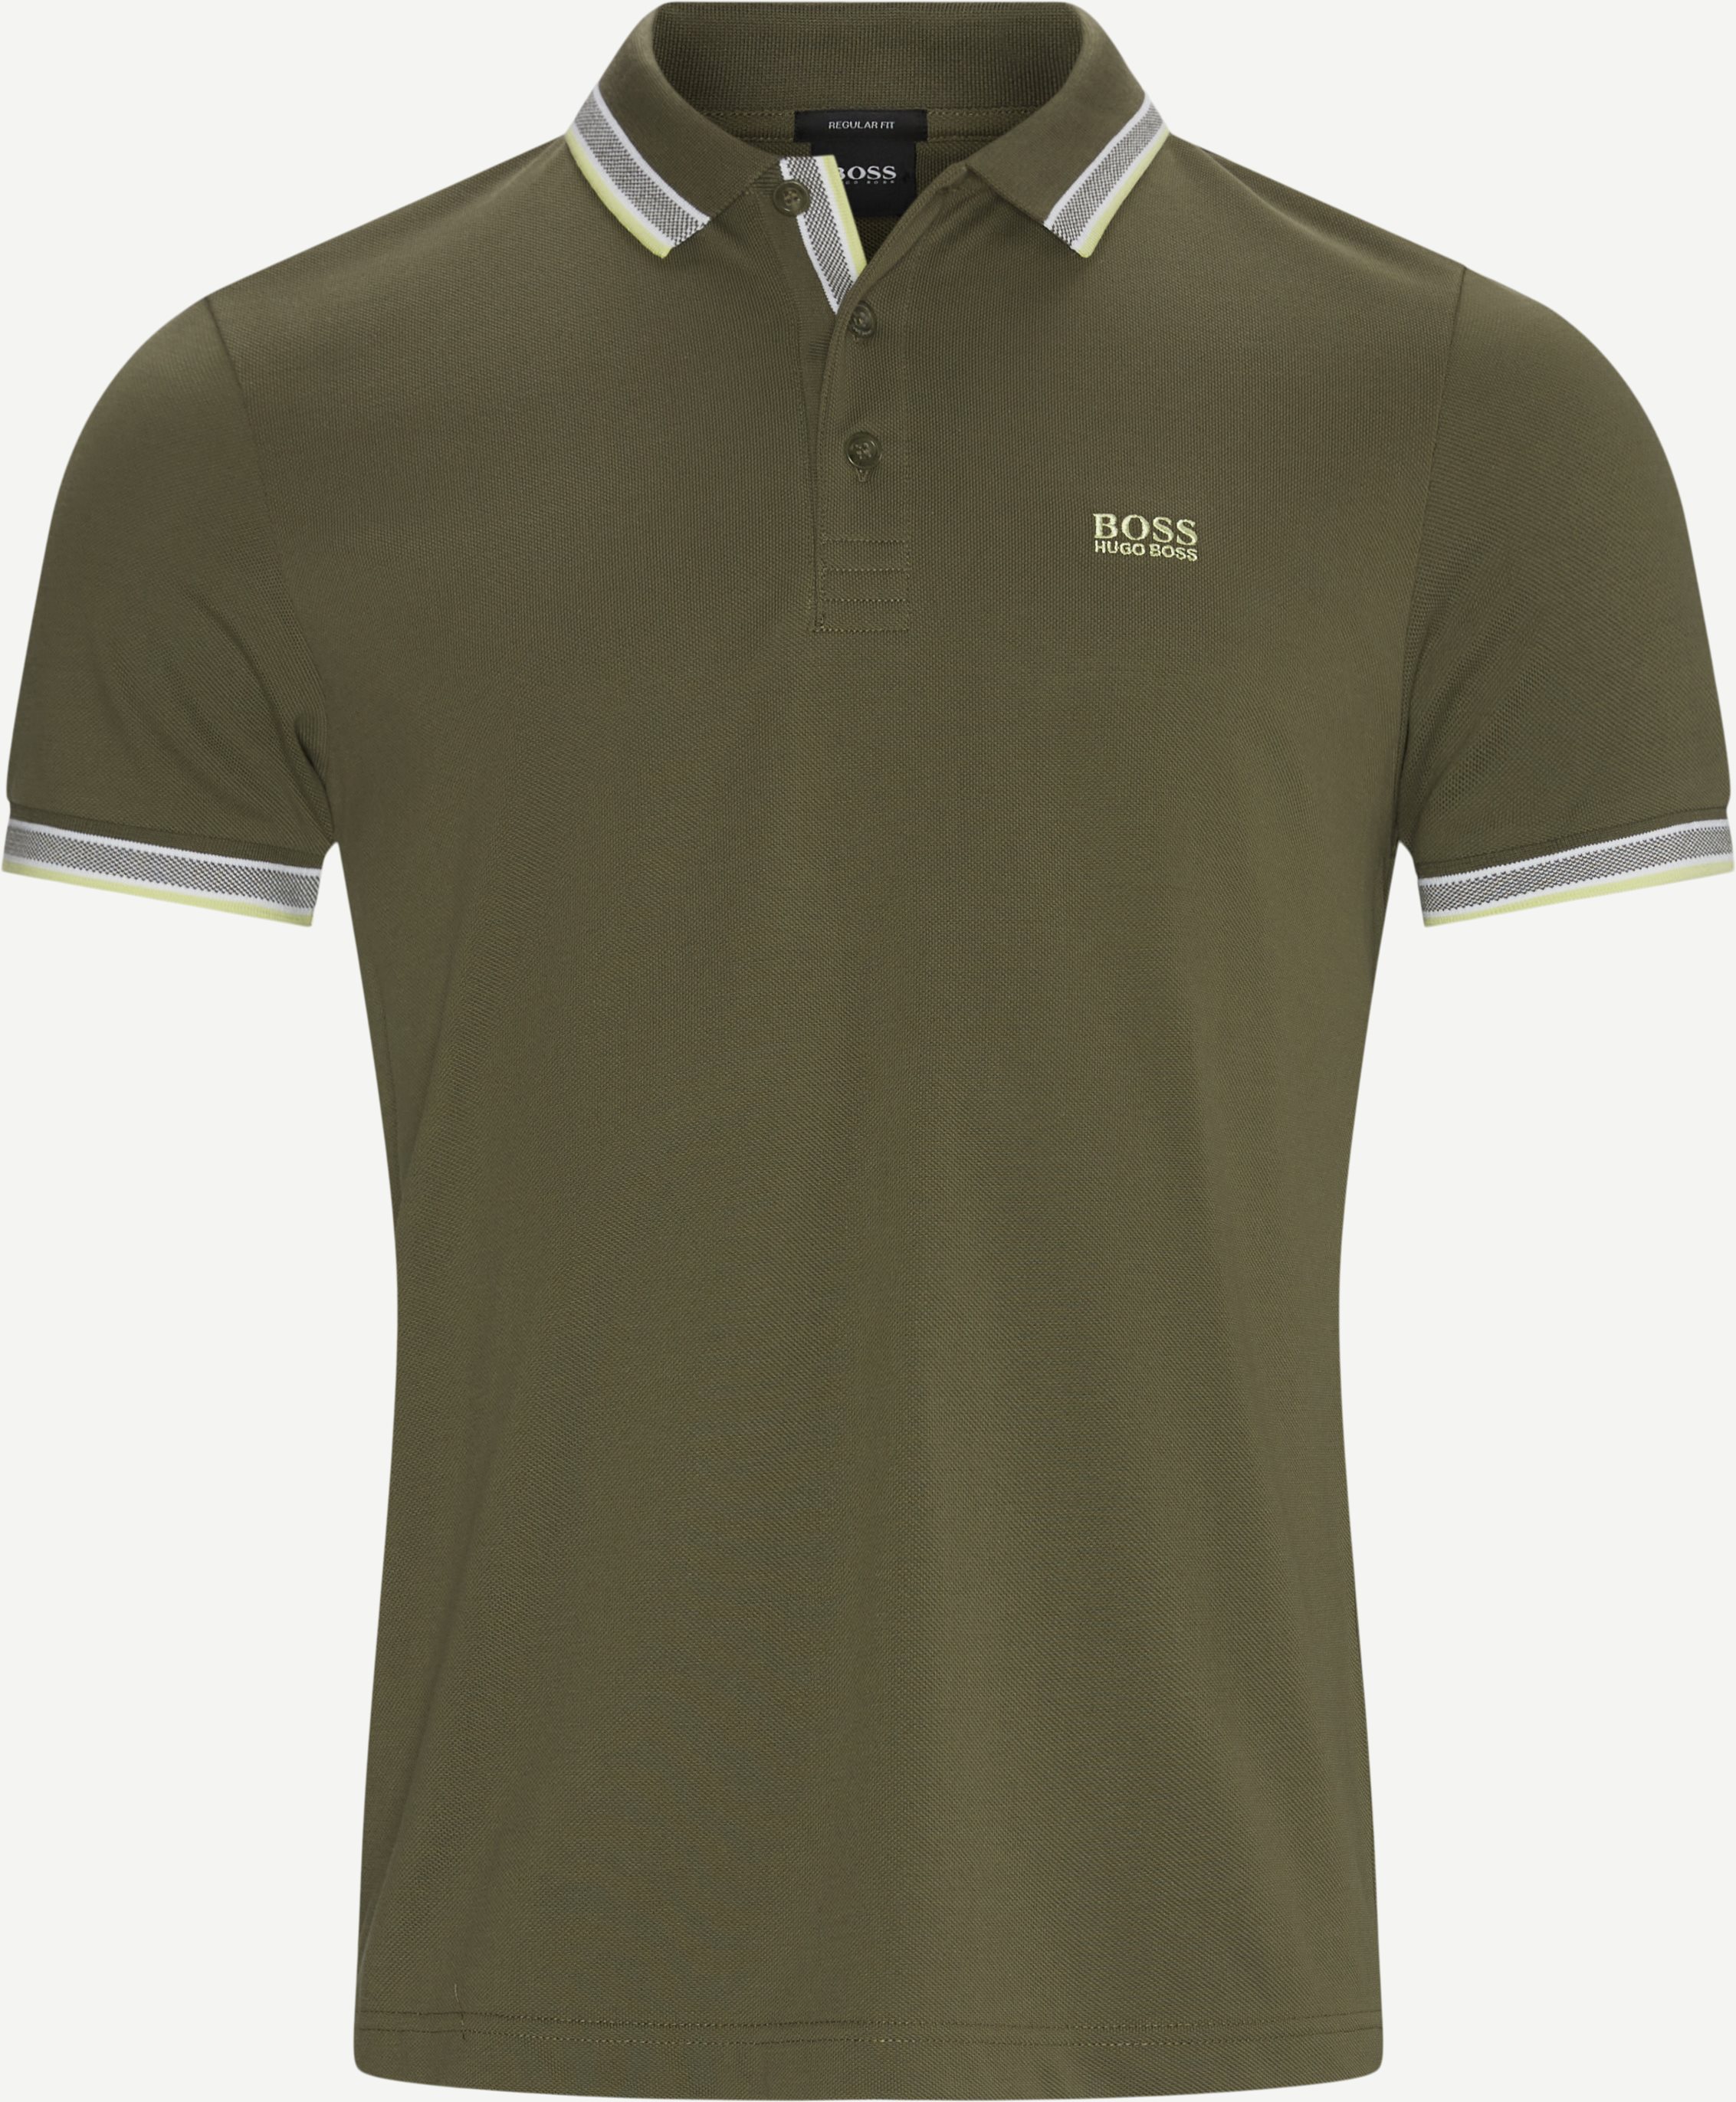 Paddy Polo T-shirt - T-shirts - Regular fit - Army